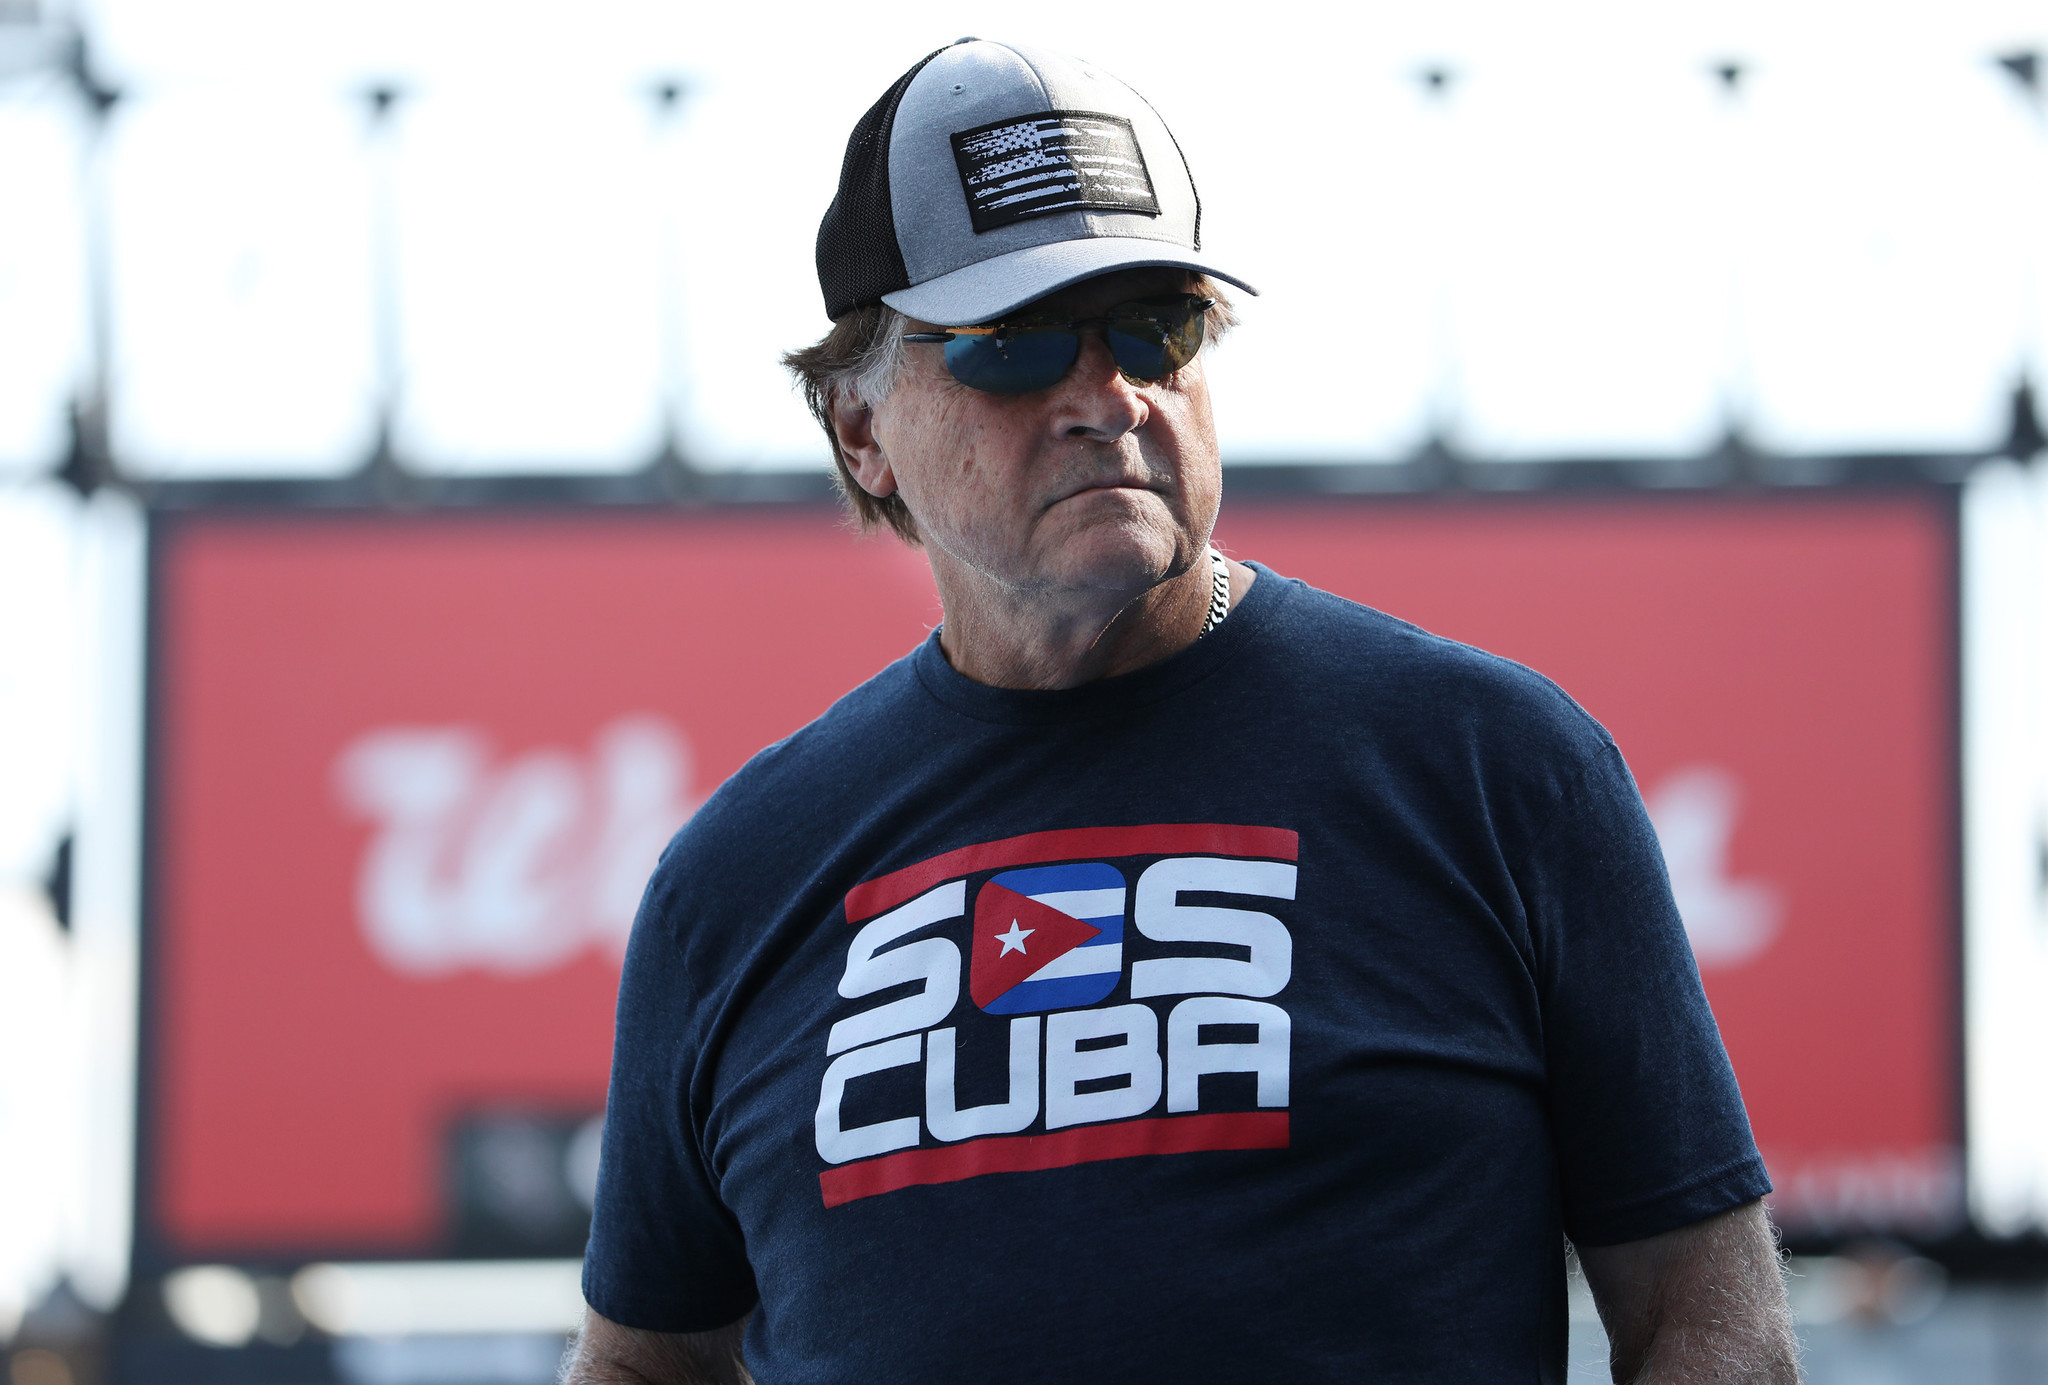 Tony La Russa: Chicago White Sox manager to return in 2022